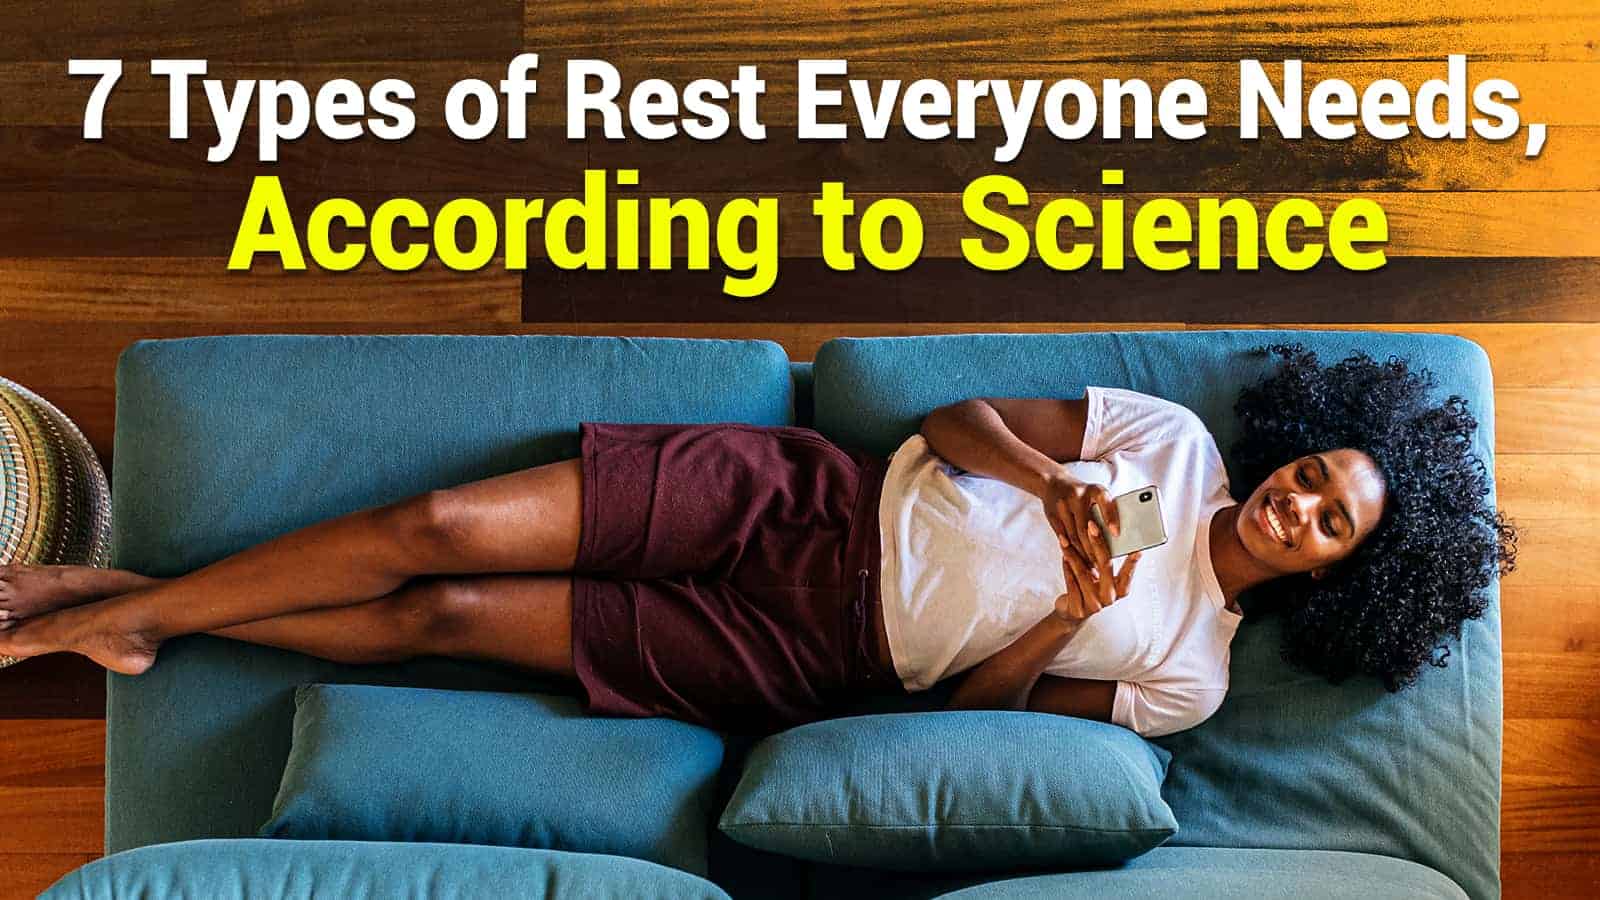 7 Types of Rest Everyone Needs, According to Science